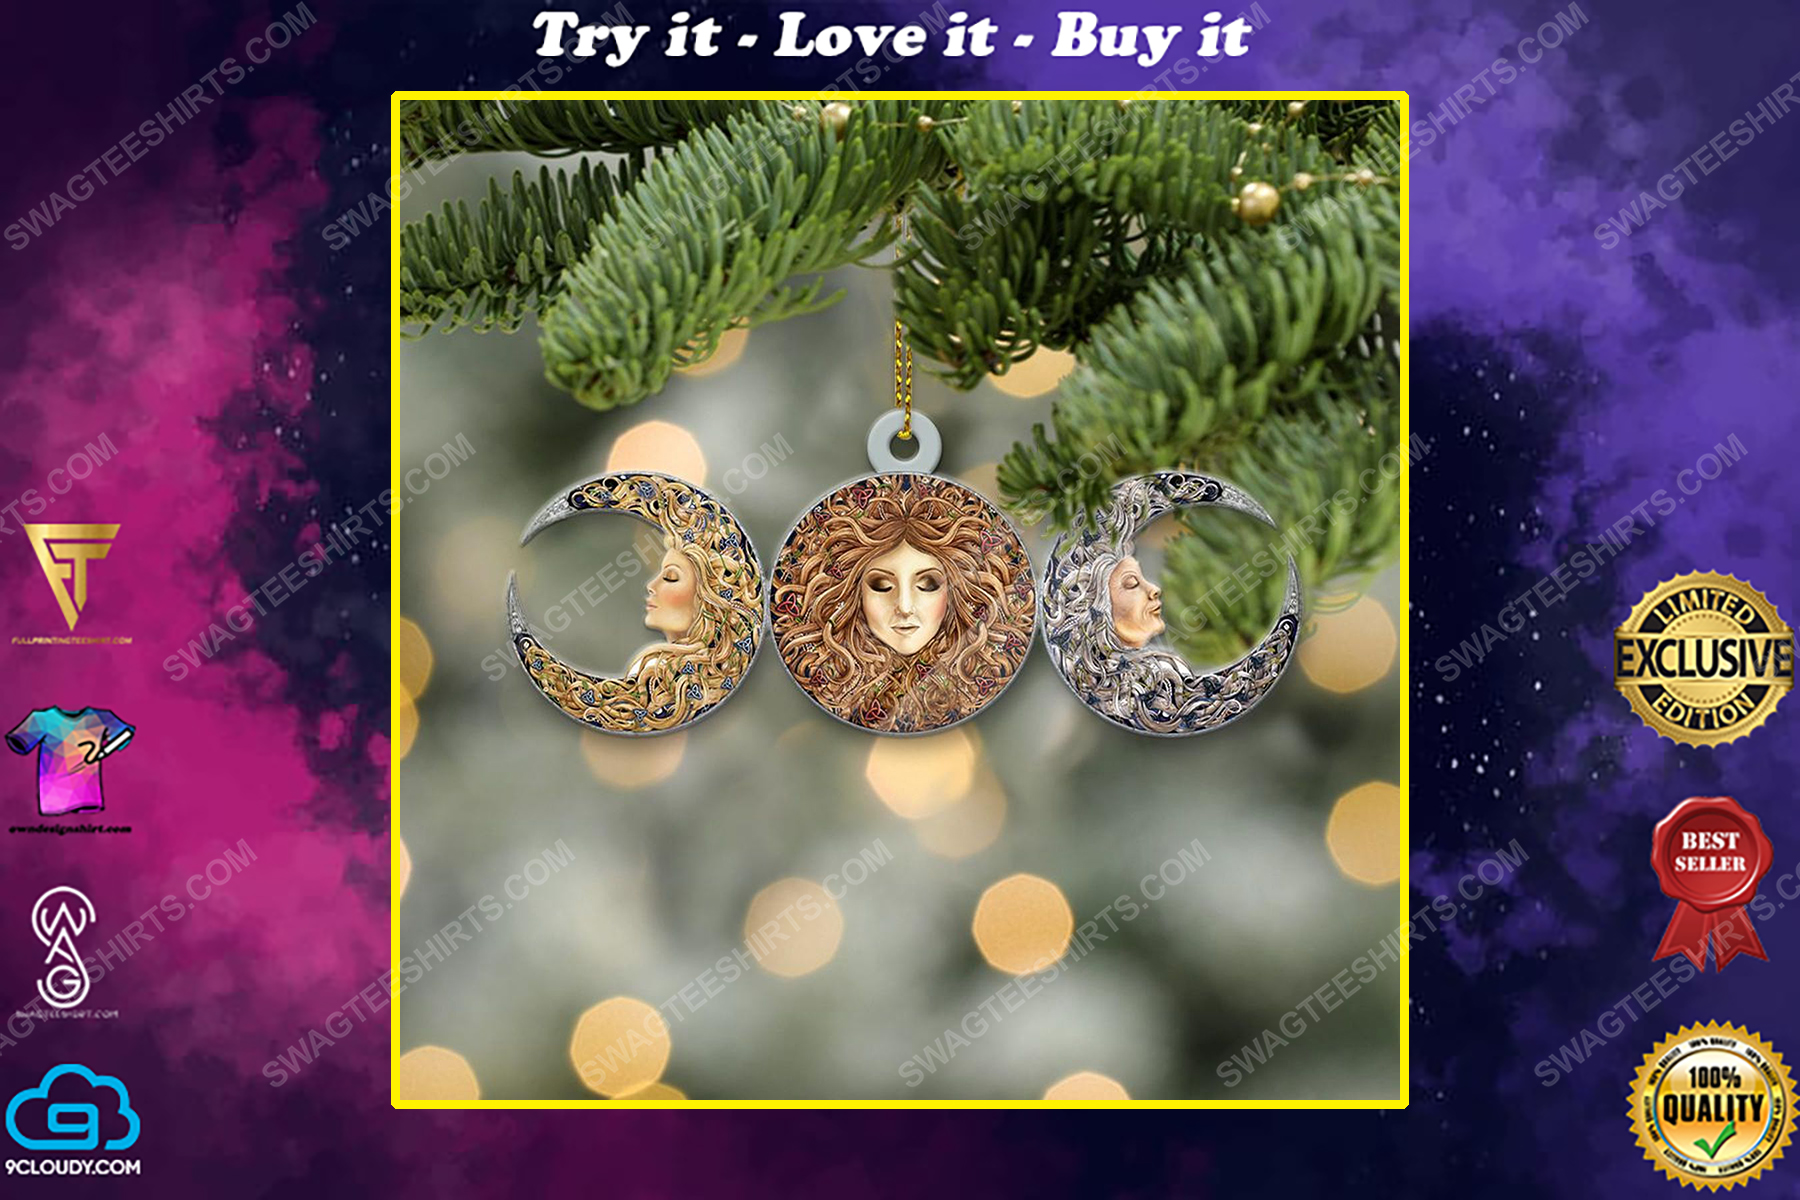 The wiccan triple goddess christmas gift ornament